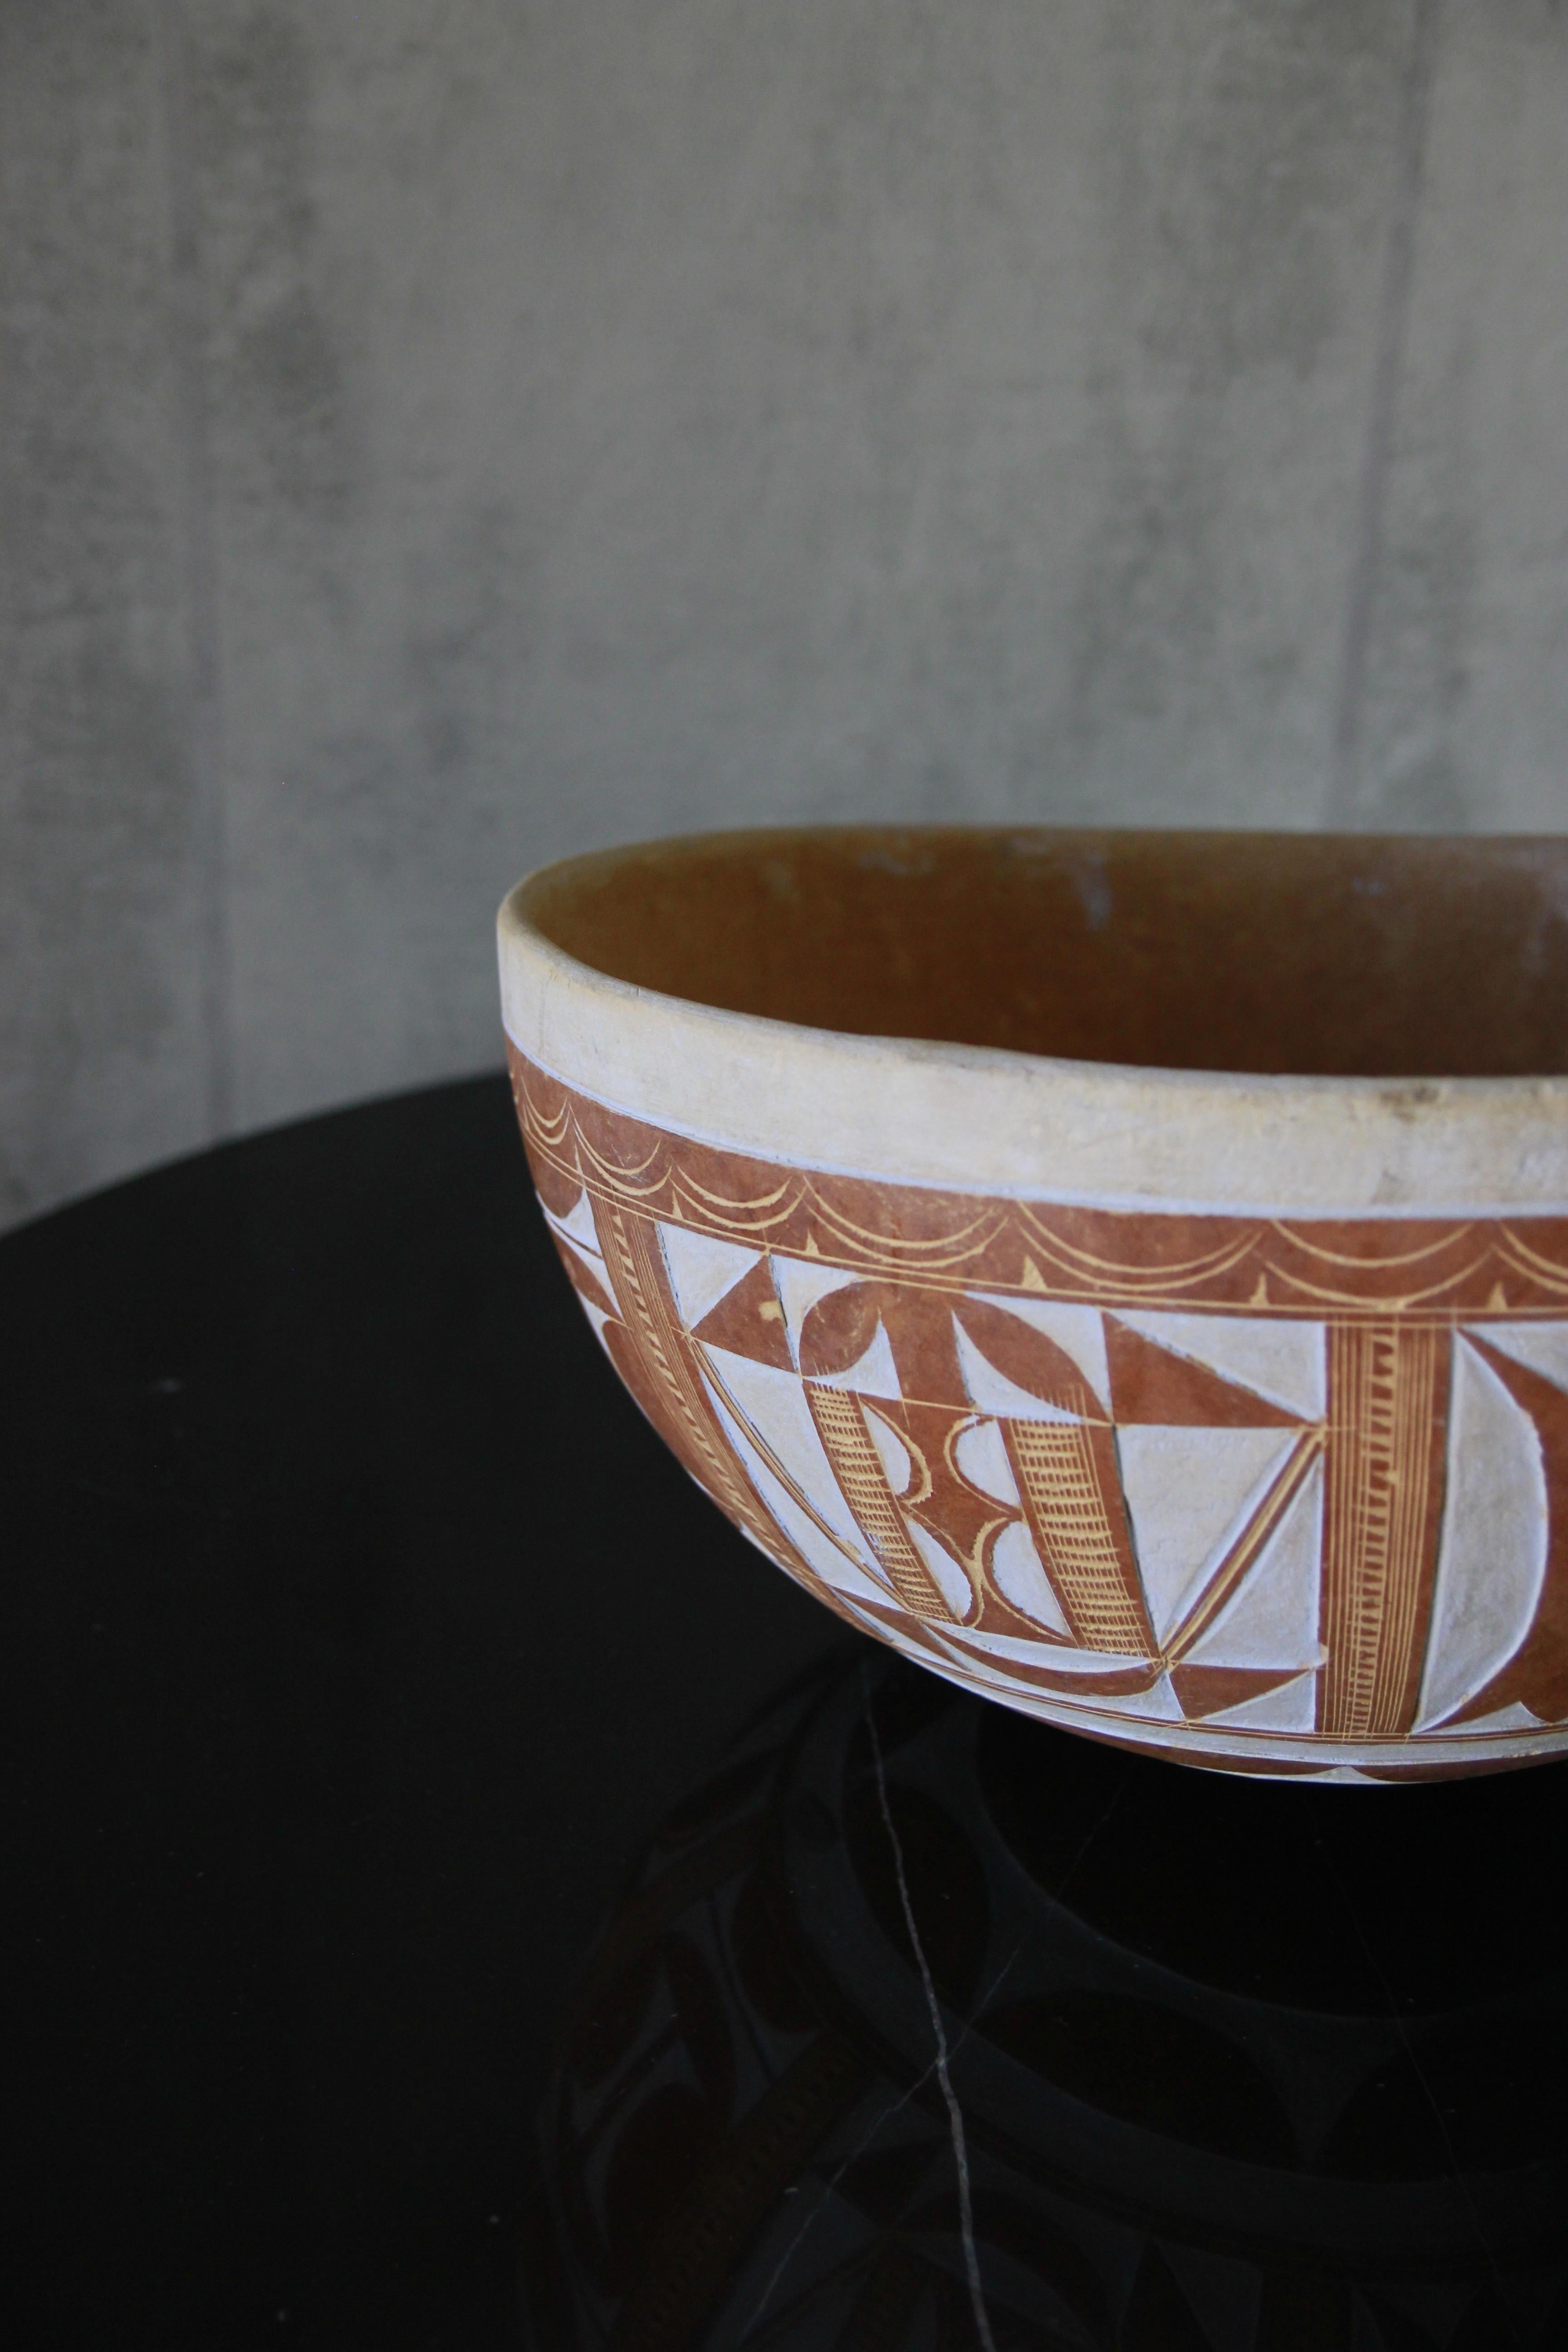 Burkinabe Vintage Hand-Crafted African Tribal Geometric Calabash Gourd Bowl #2 For Sale